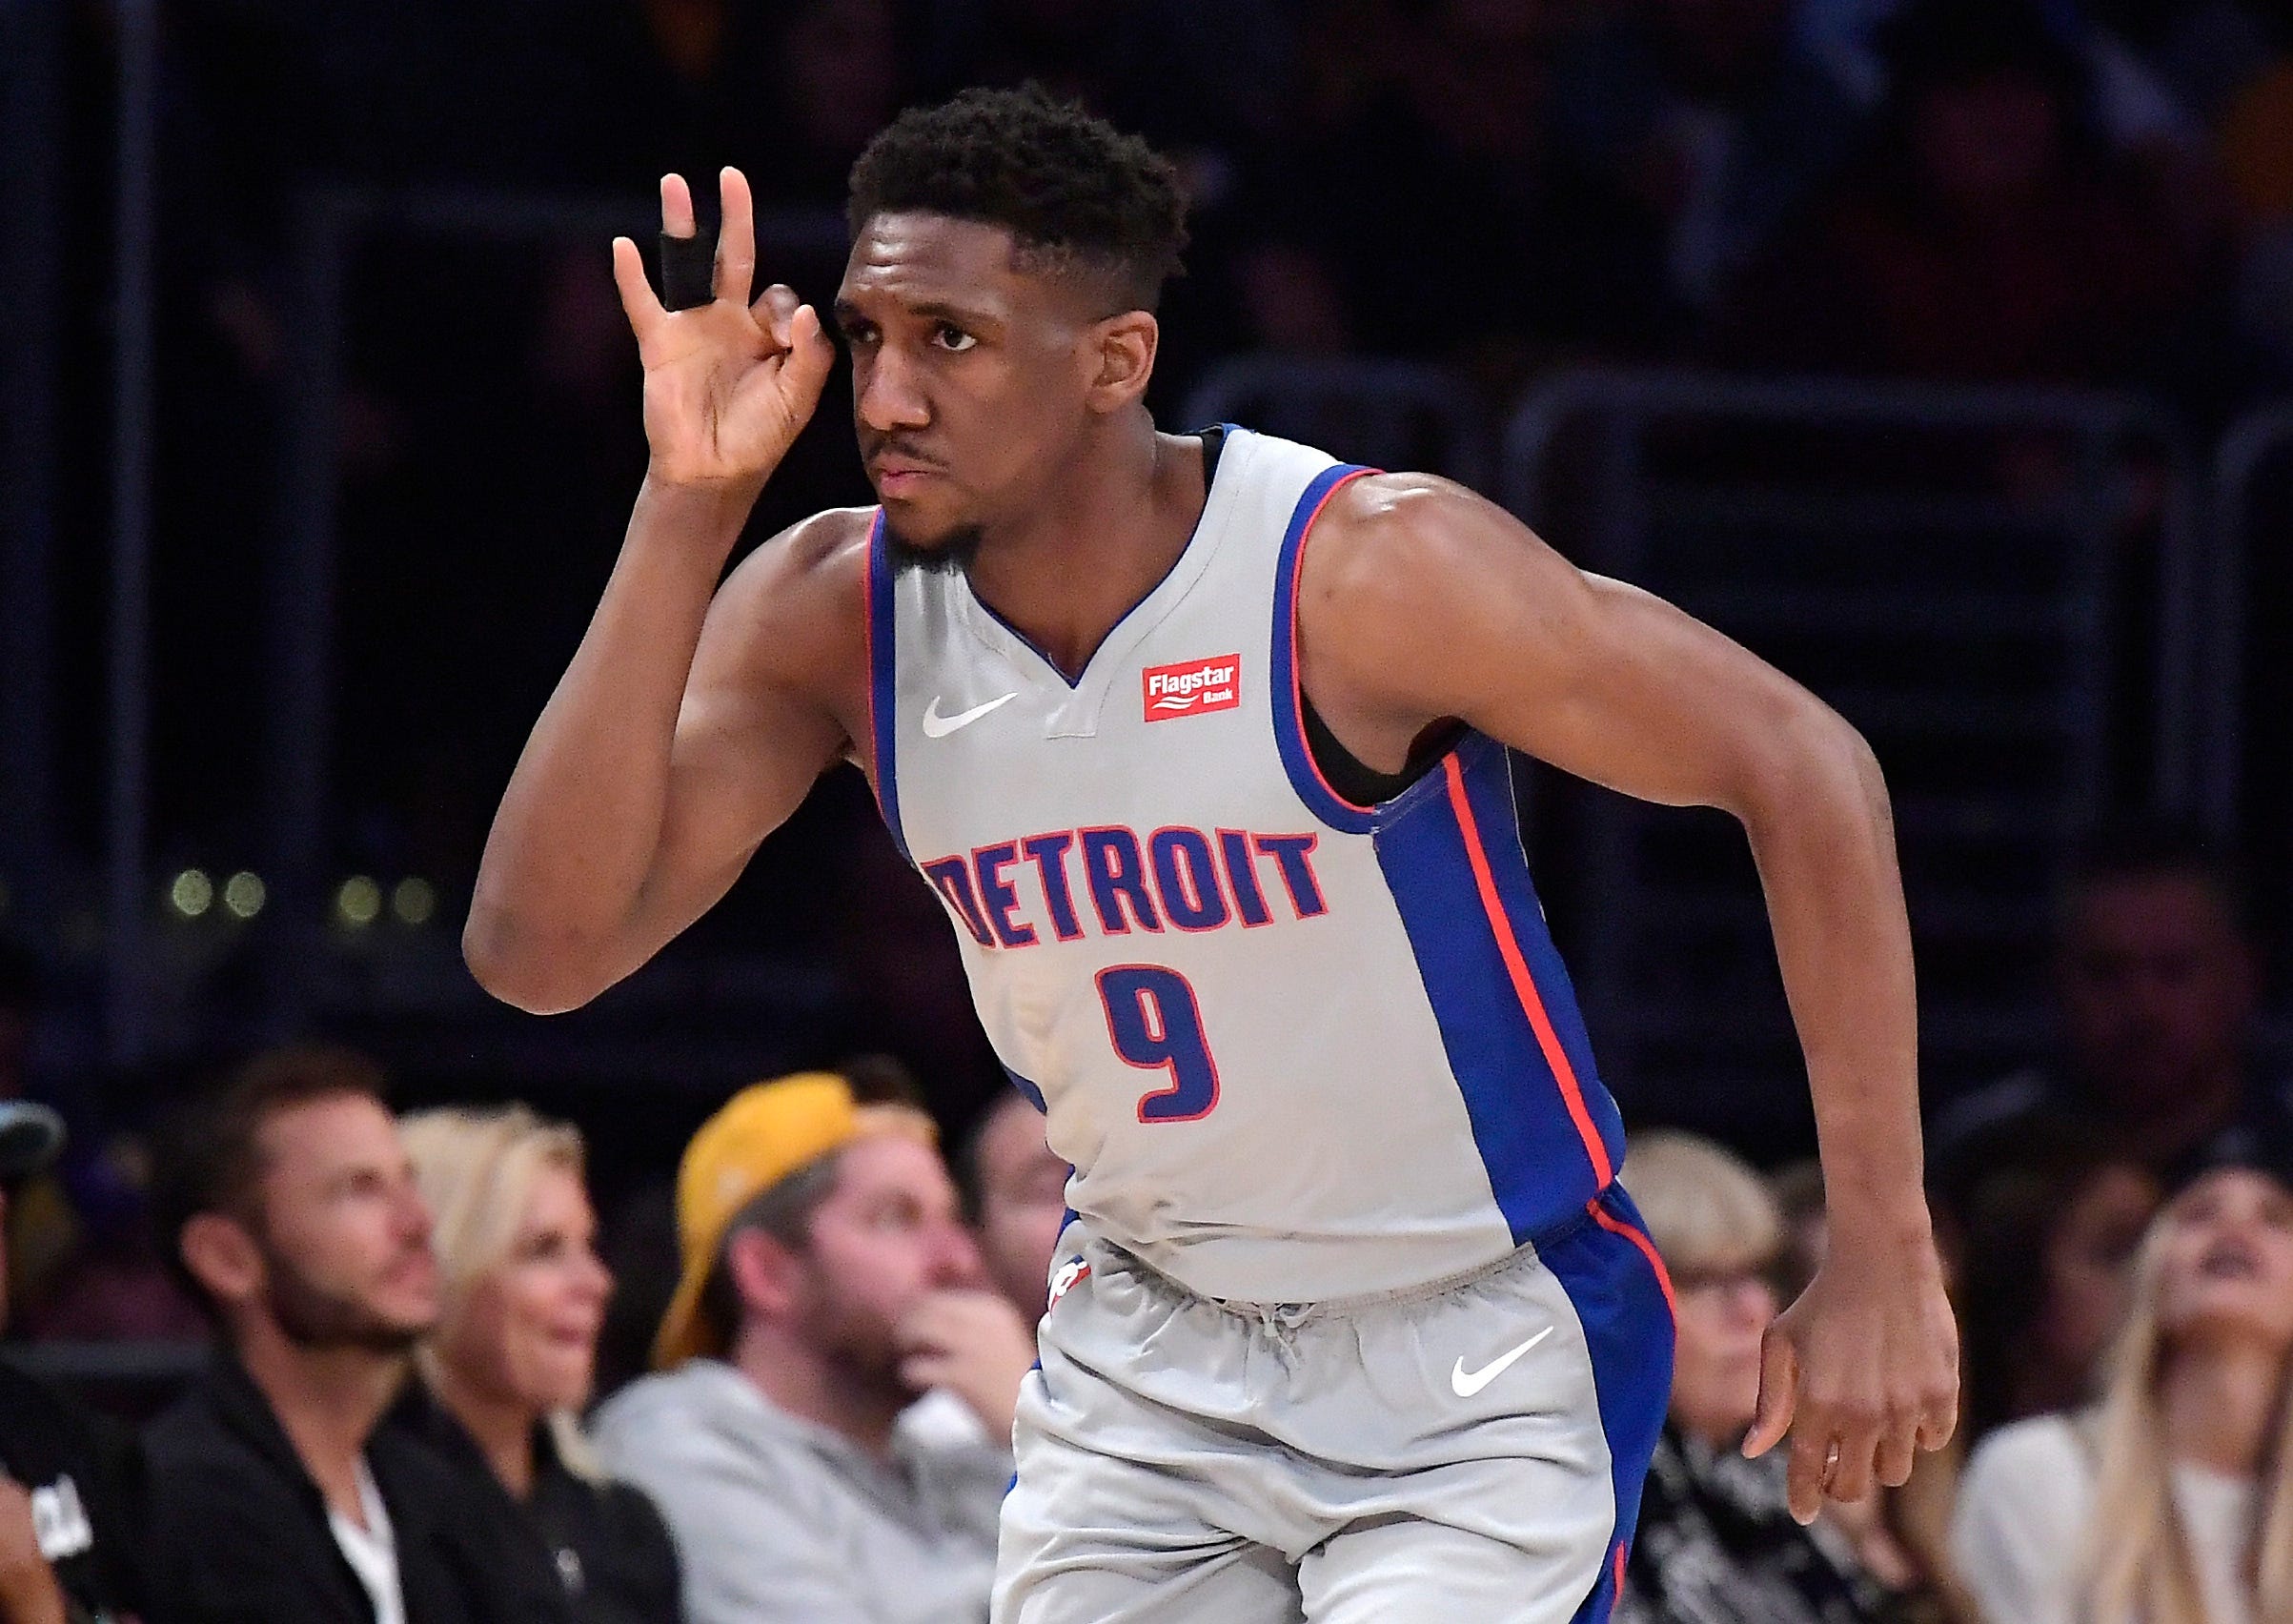 Detroit Pistons guard Langston Galloway gestures after hitting a 3-point shot during the second half.